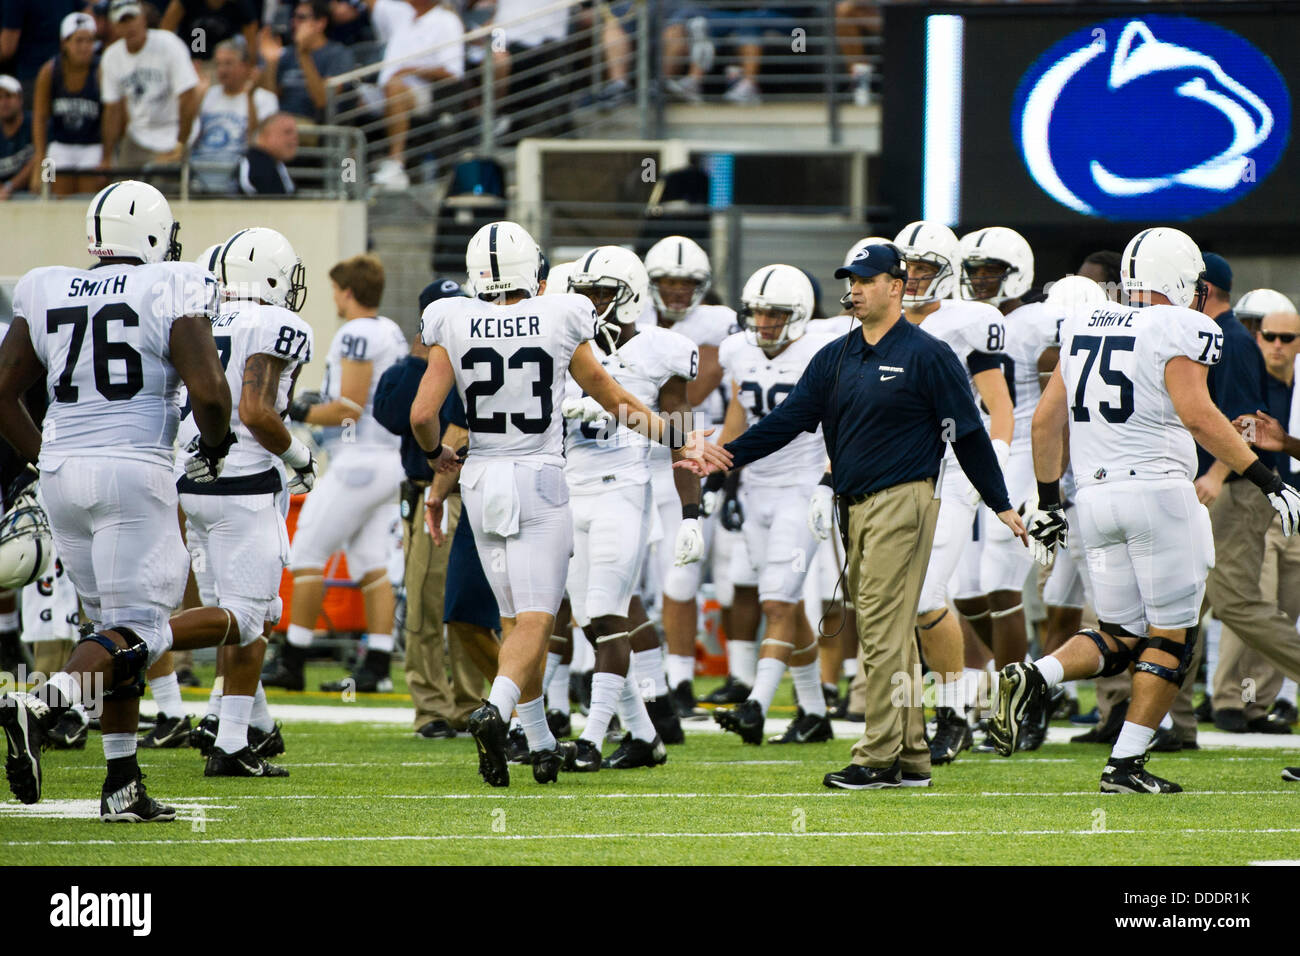 Aug. 31, 2013 - East Rutherford, NJ, U.S - August 31, 2013: Penn State Nittany Lions head coach Bill O' Brien congratulates Penn State Nittany Lions safety Ryan Keiser (23) and his team during the game between Penn State Nittany Lions and Syracuse Orange at Met Life Stadium in East Rutherford, NJ. Penn State Nittany Lions defeat The Syracuse Orange 23-17. Stock Photo